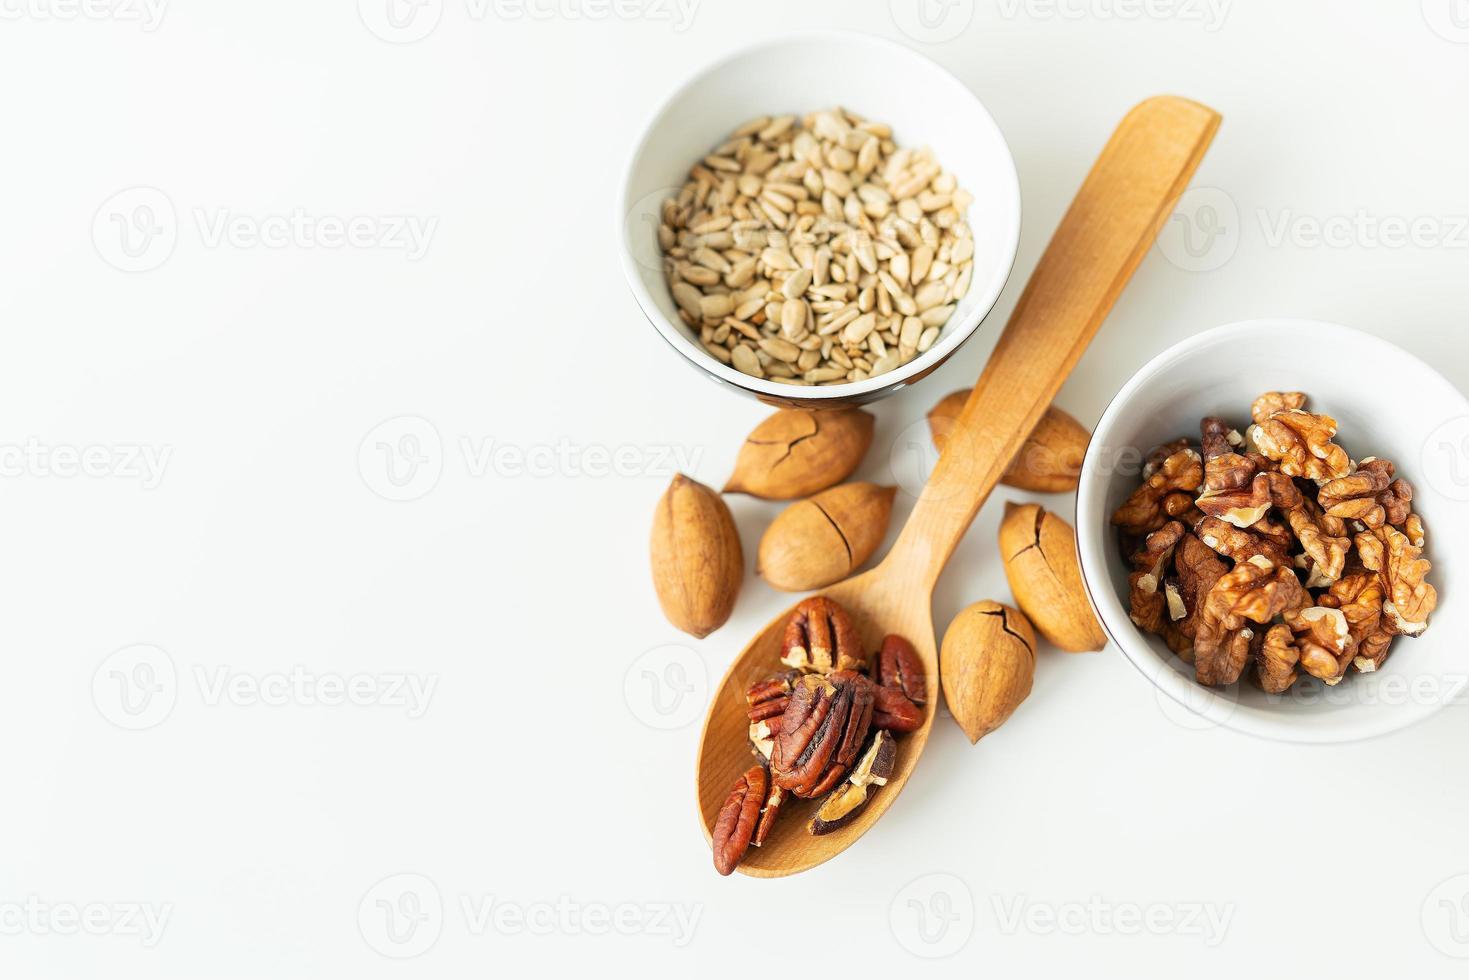 A close-up of a plate with different nuts and seeds along with a wooden spoon lie on a white table. The concept of weight loss, healthy eating, overweight. Fitness menu. photo